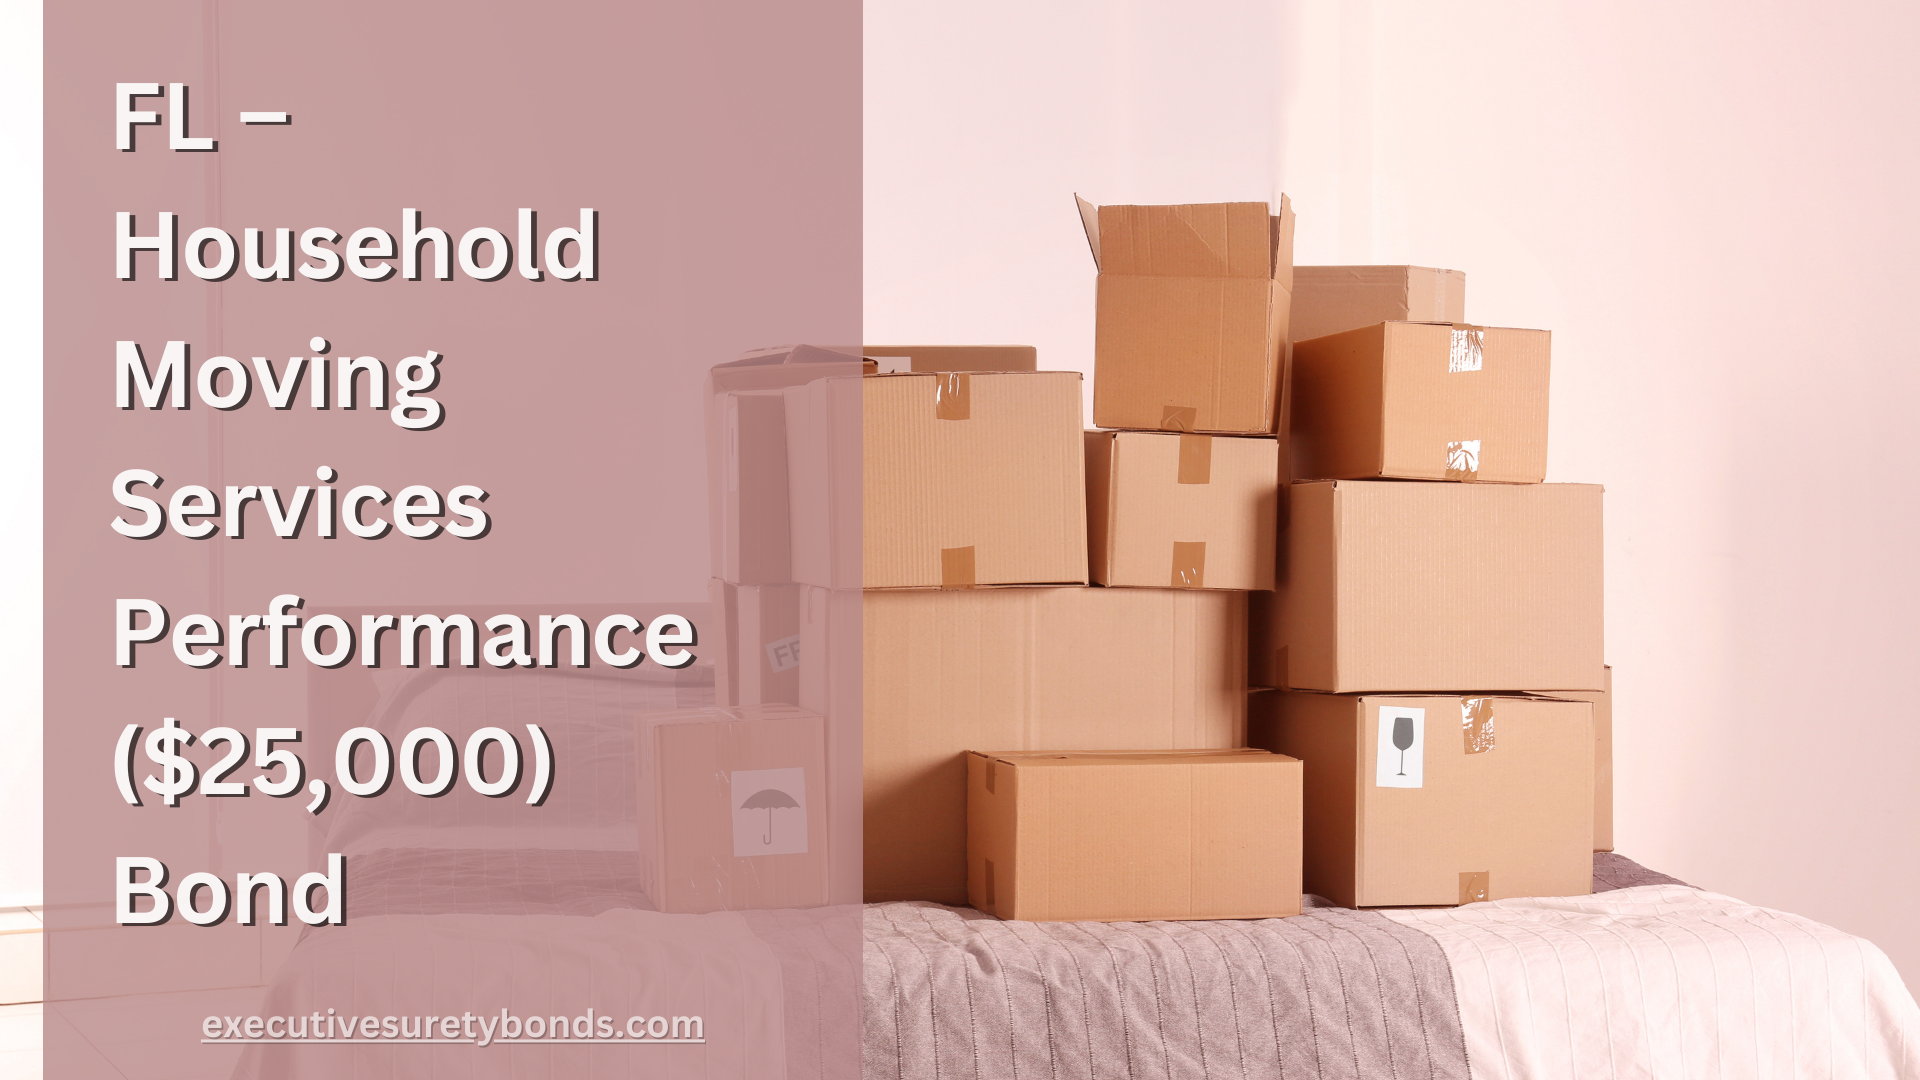 FL – Household Moving Services Performance ($25,000) Bond